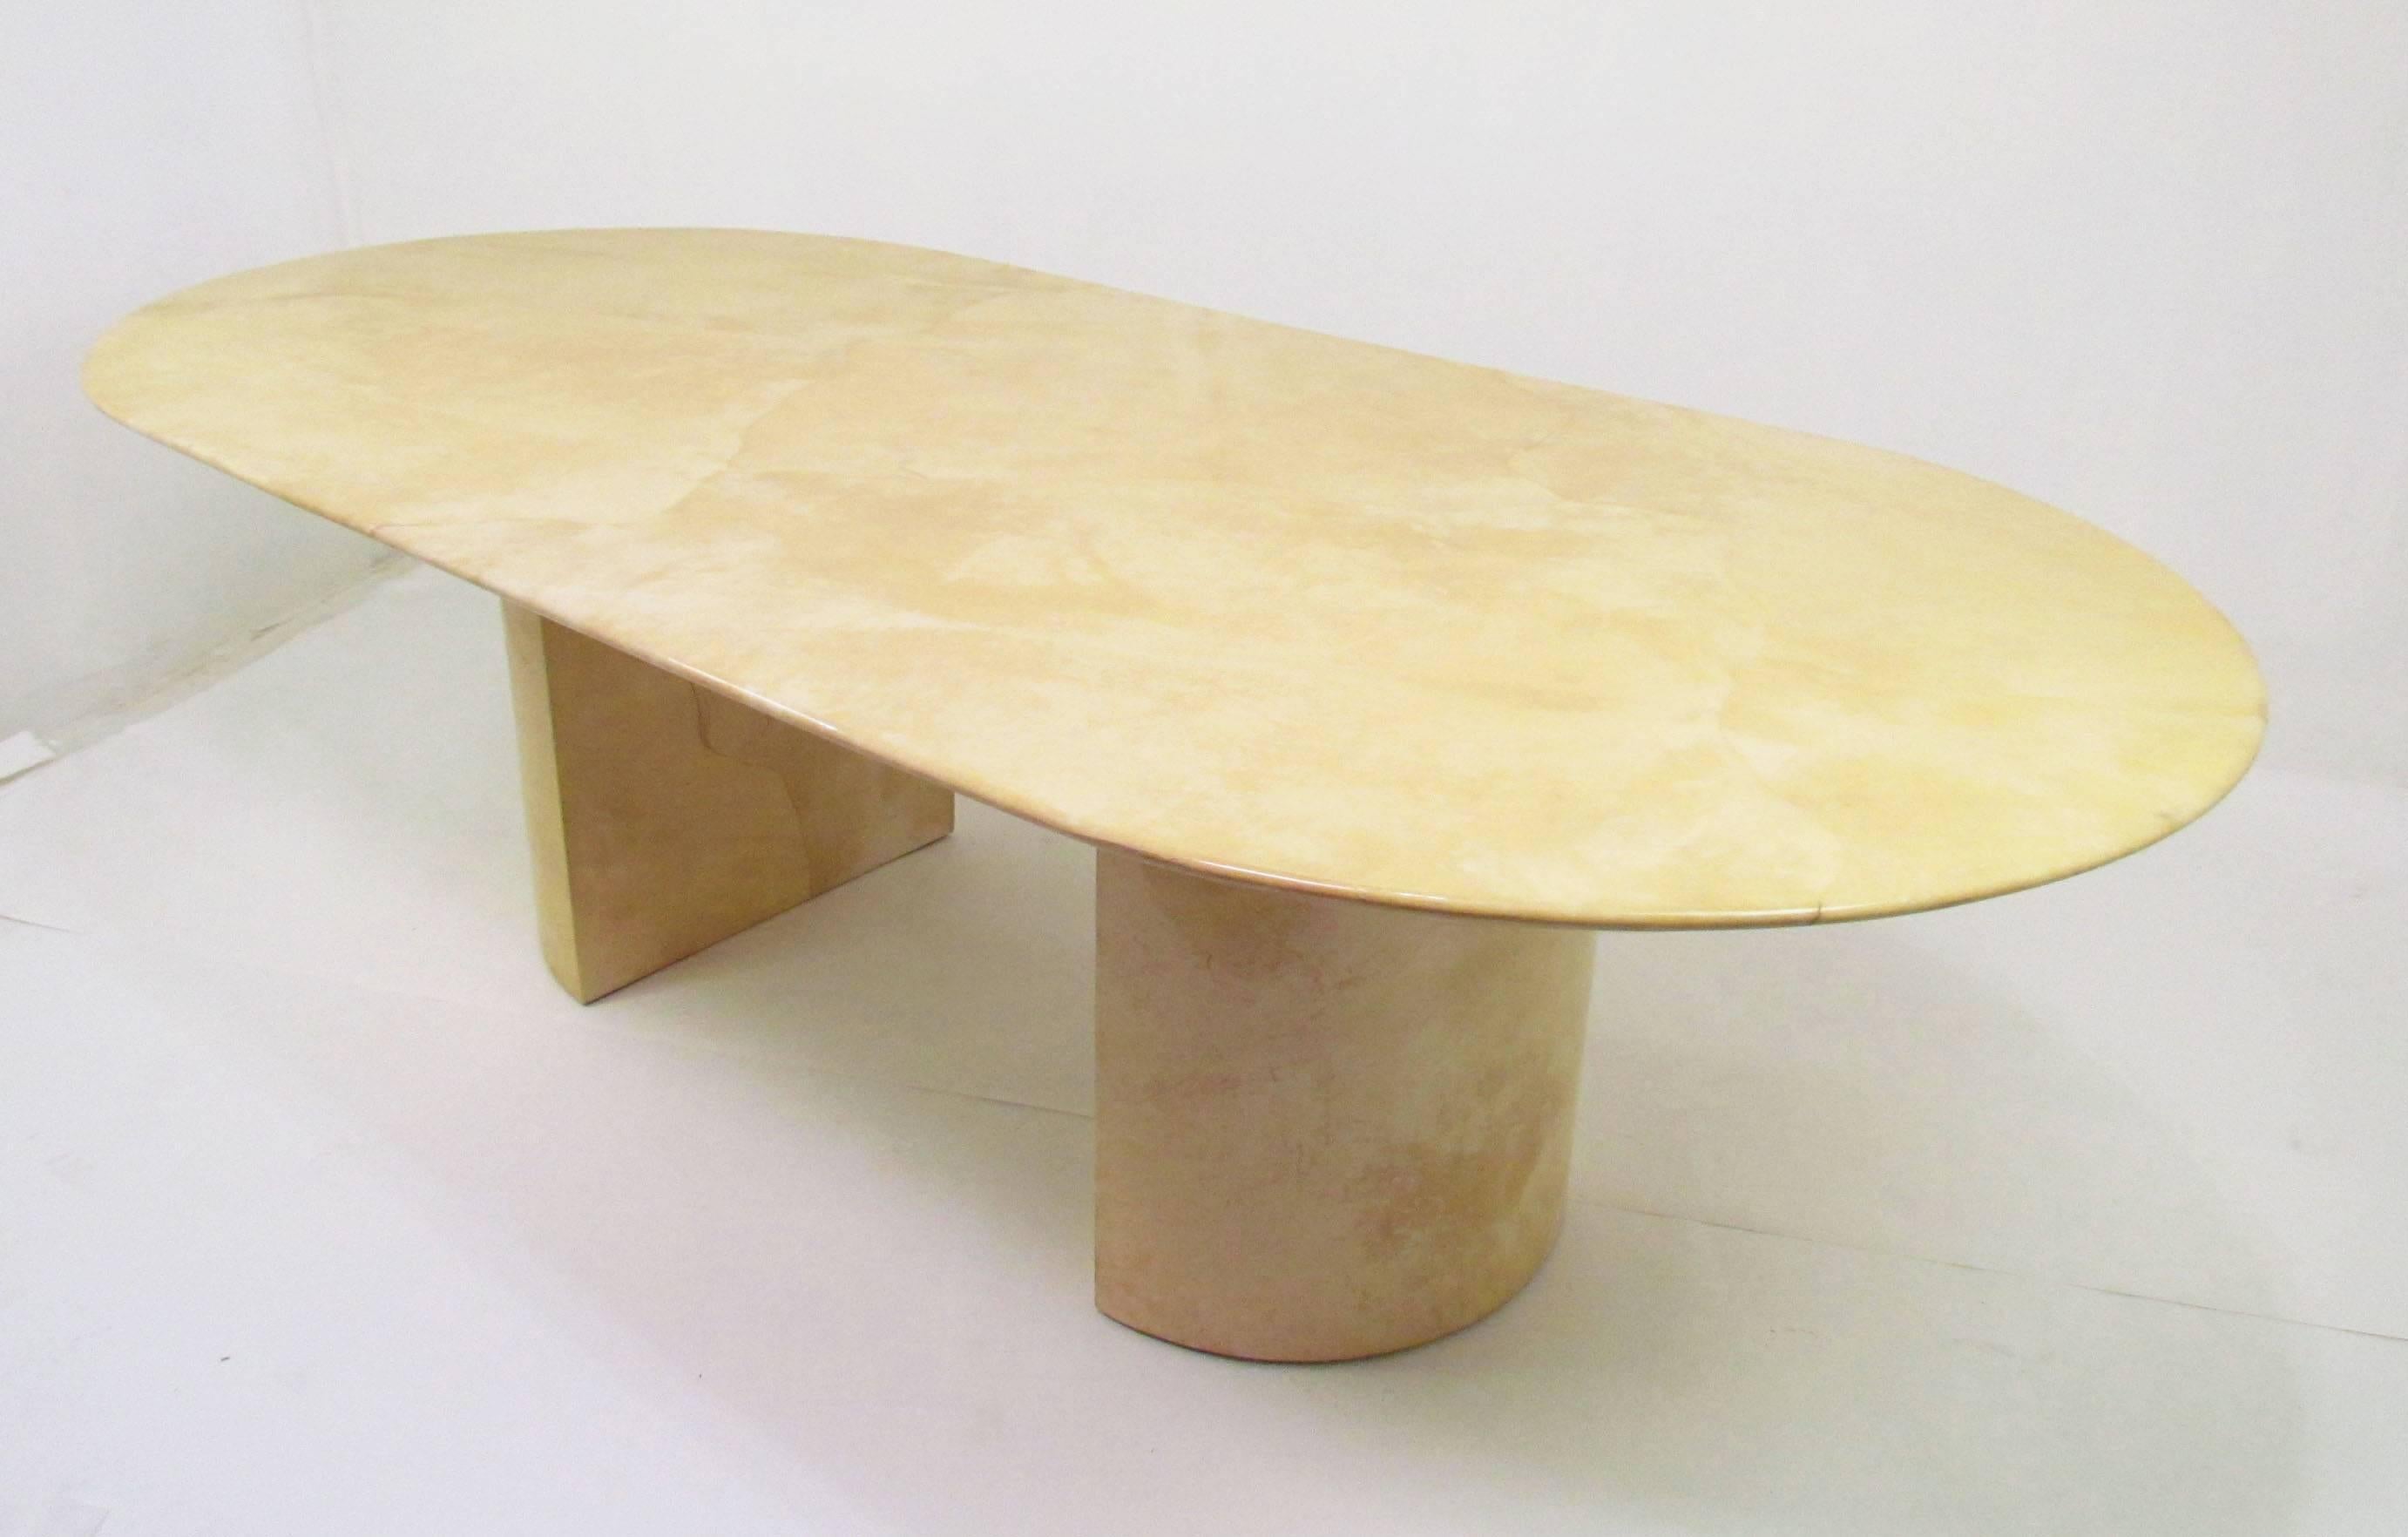 Large oval racetrack dining table supported by two demilune pedestals, all clad in genuine lacquered goatskin. Although no longer retains a label, many examples of this knife edged table exist that are signed Karl Springer. Each pedestal base is